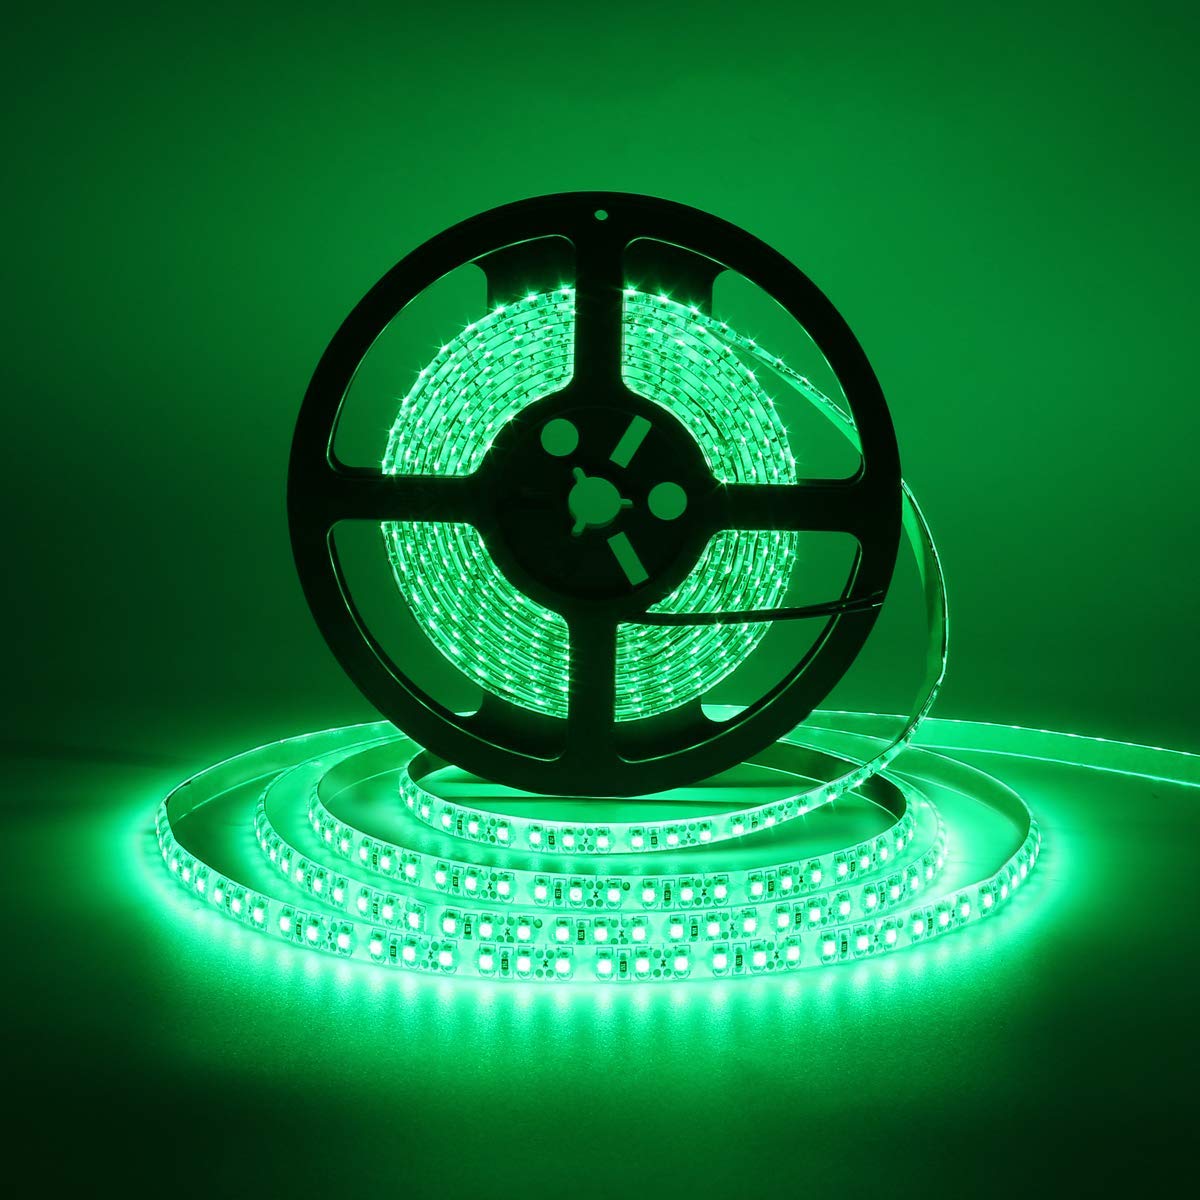 SUPERNIGHT 600 LEDS Light Strip Waterproof, 16.4FT Green LED Rope Lighting Flexible Tape Decorate for Bedroom Boat Car TV backlighting Holidays Party